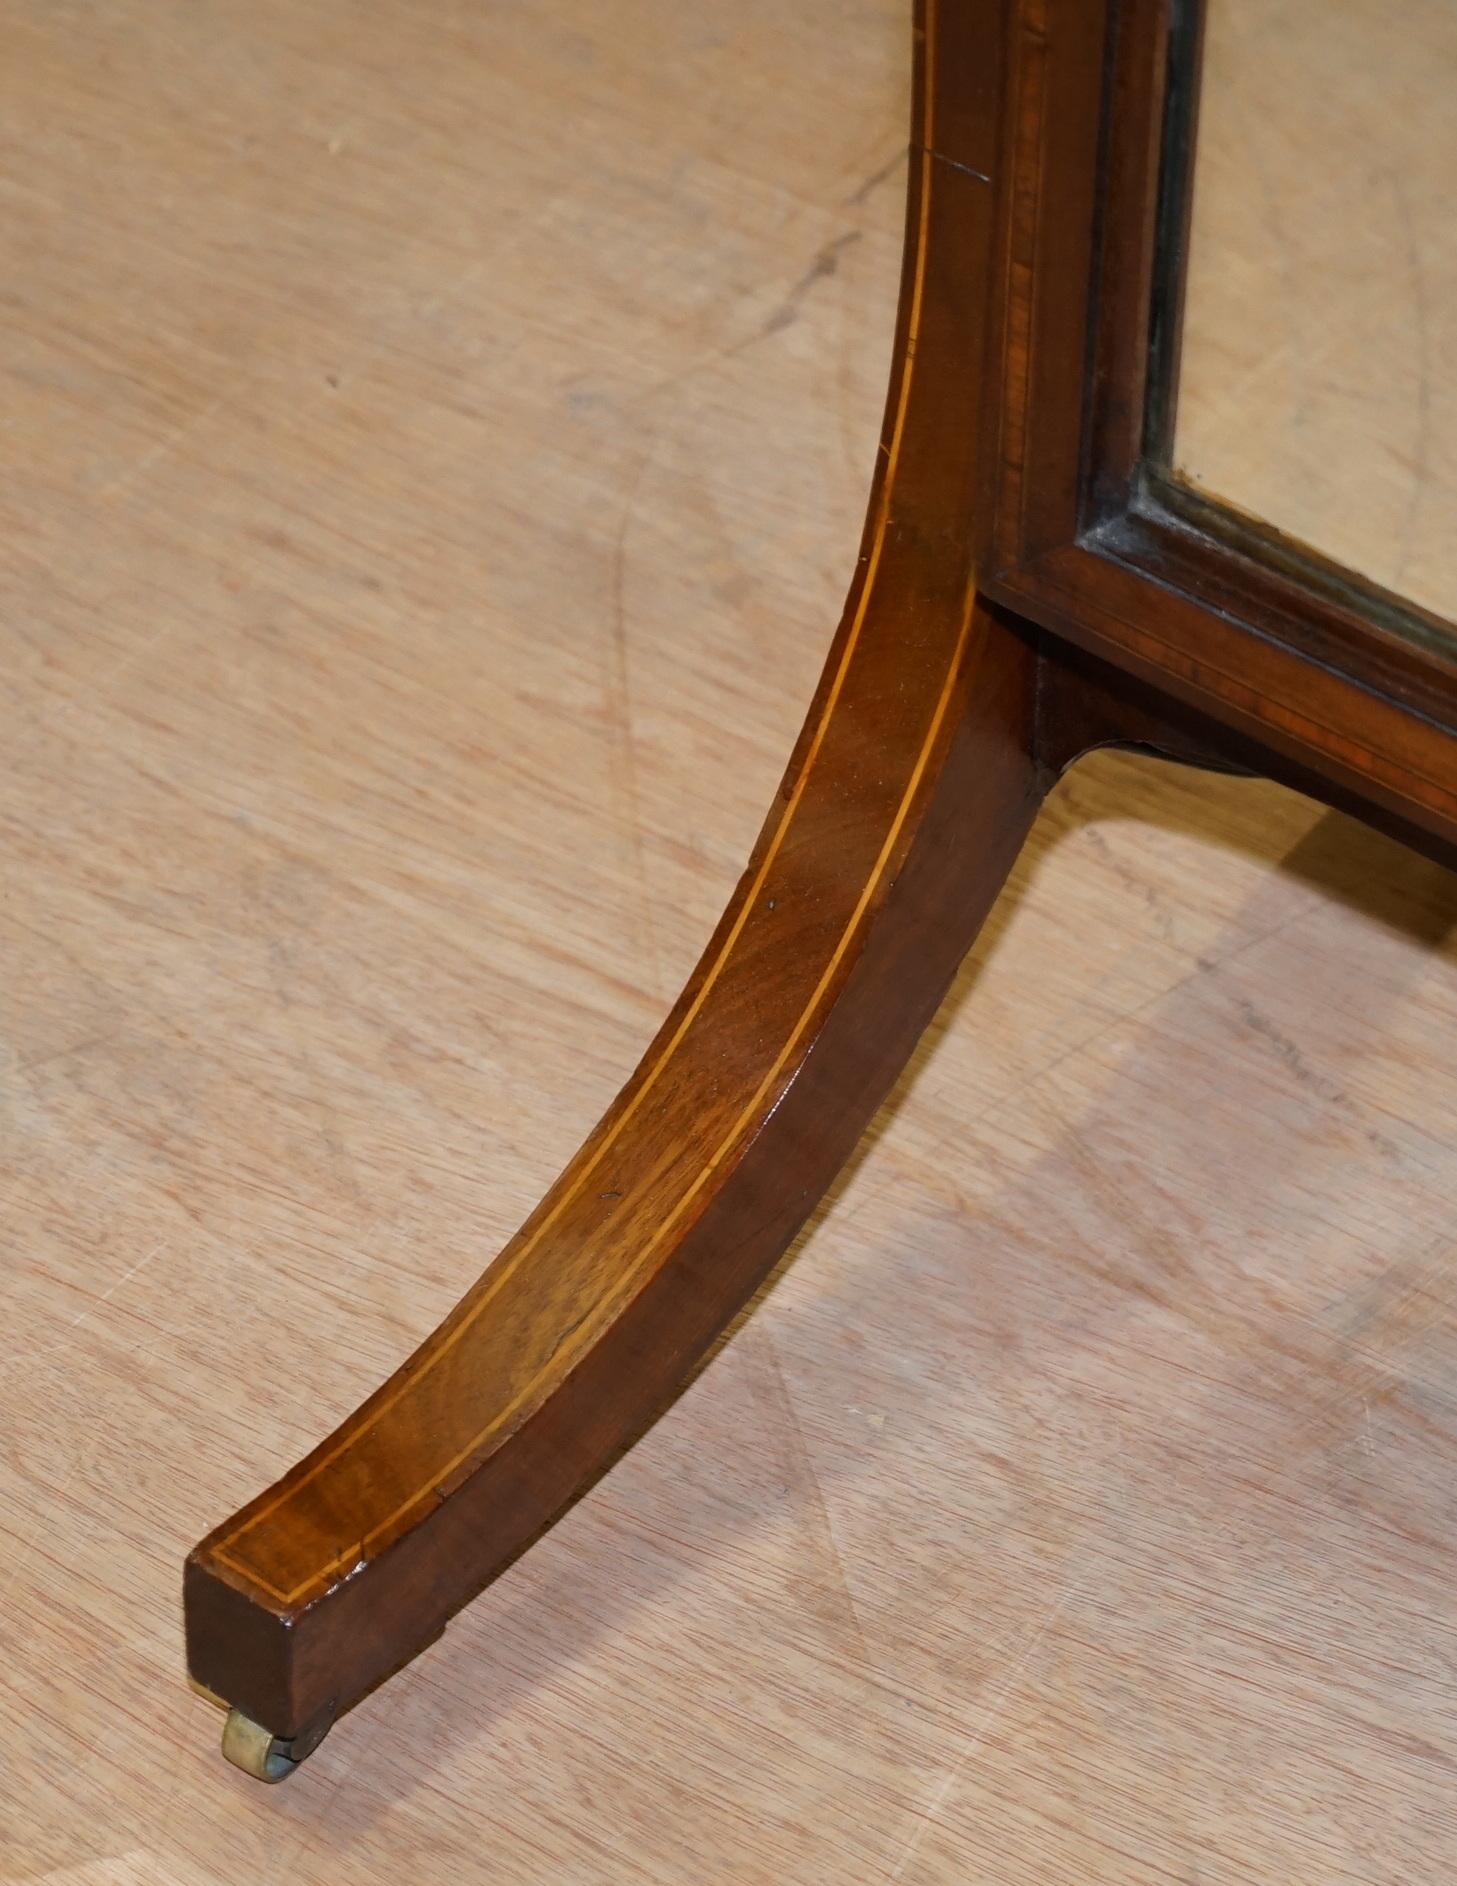 Hand-Crafted Exquisite Restored Howard & Son's Berners Street Walnut & Hardwood Cheval Mirror